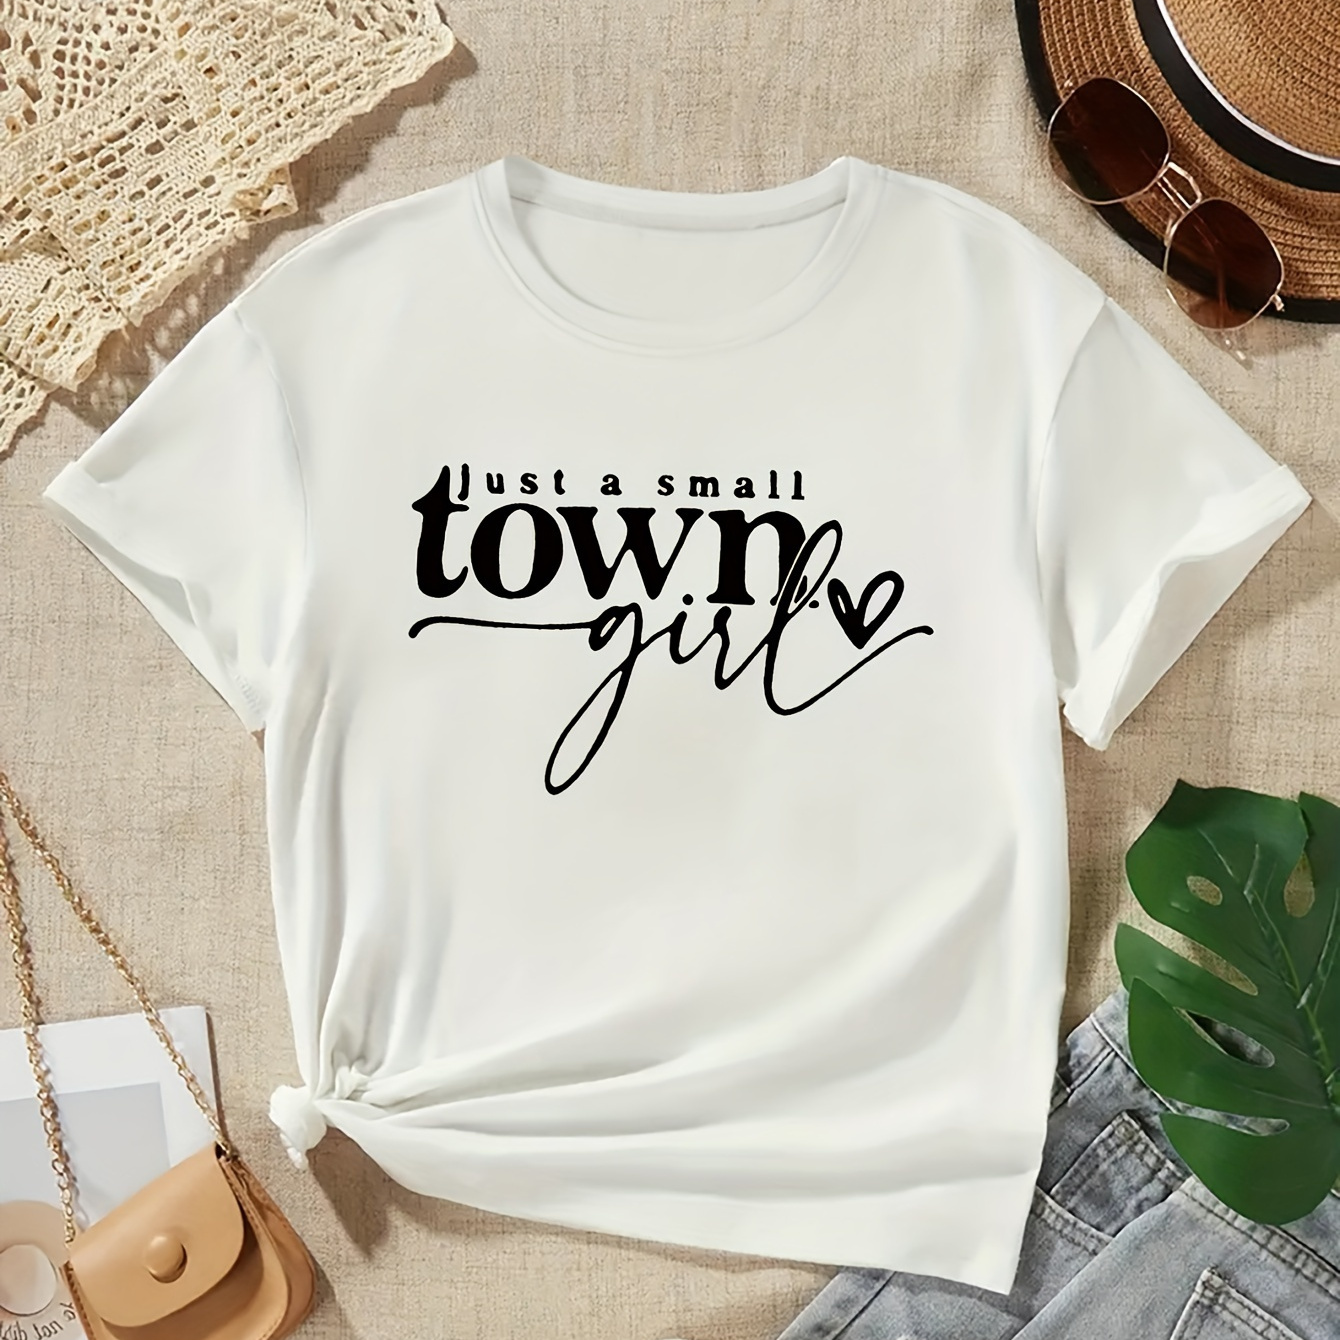 

Just A Small Town Girl Print, Tween Girls' Casual & Comfy Crew Neck Short Sleeve Tee For Spring & Summer, Tween Girls' Clothes For Outdoor Activities